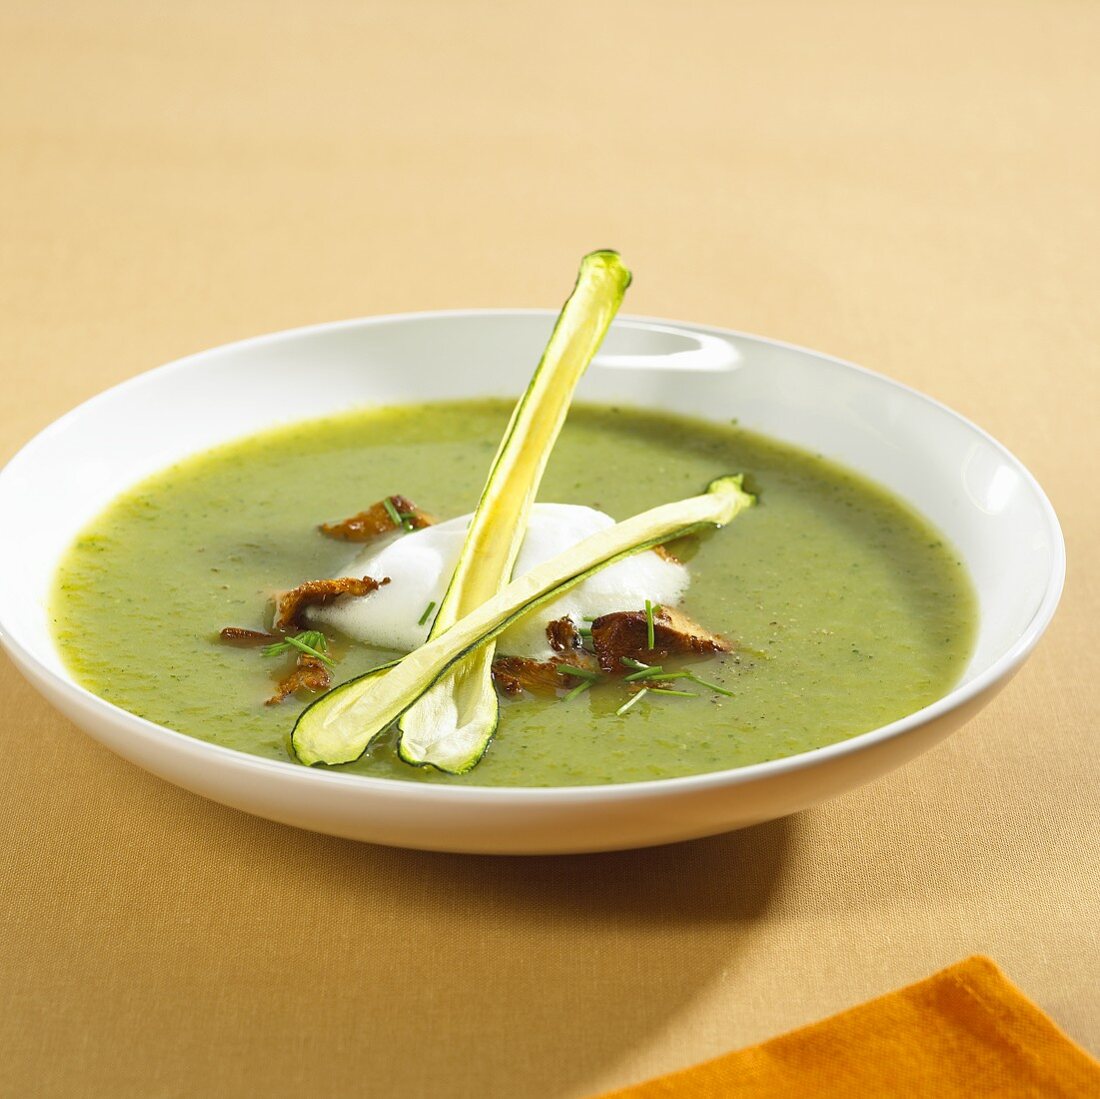 A plate of courgette and pepper soup with chanterelles